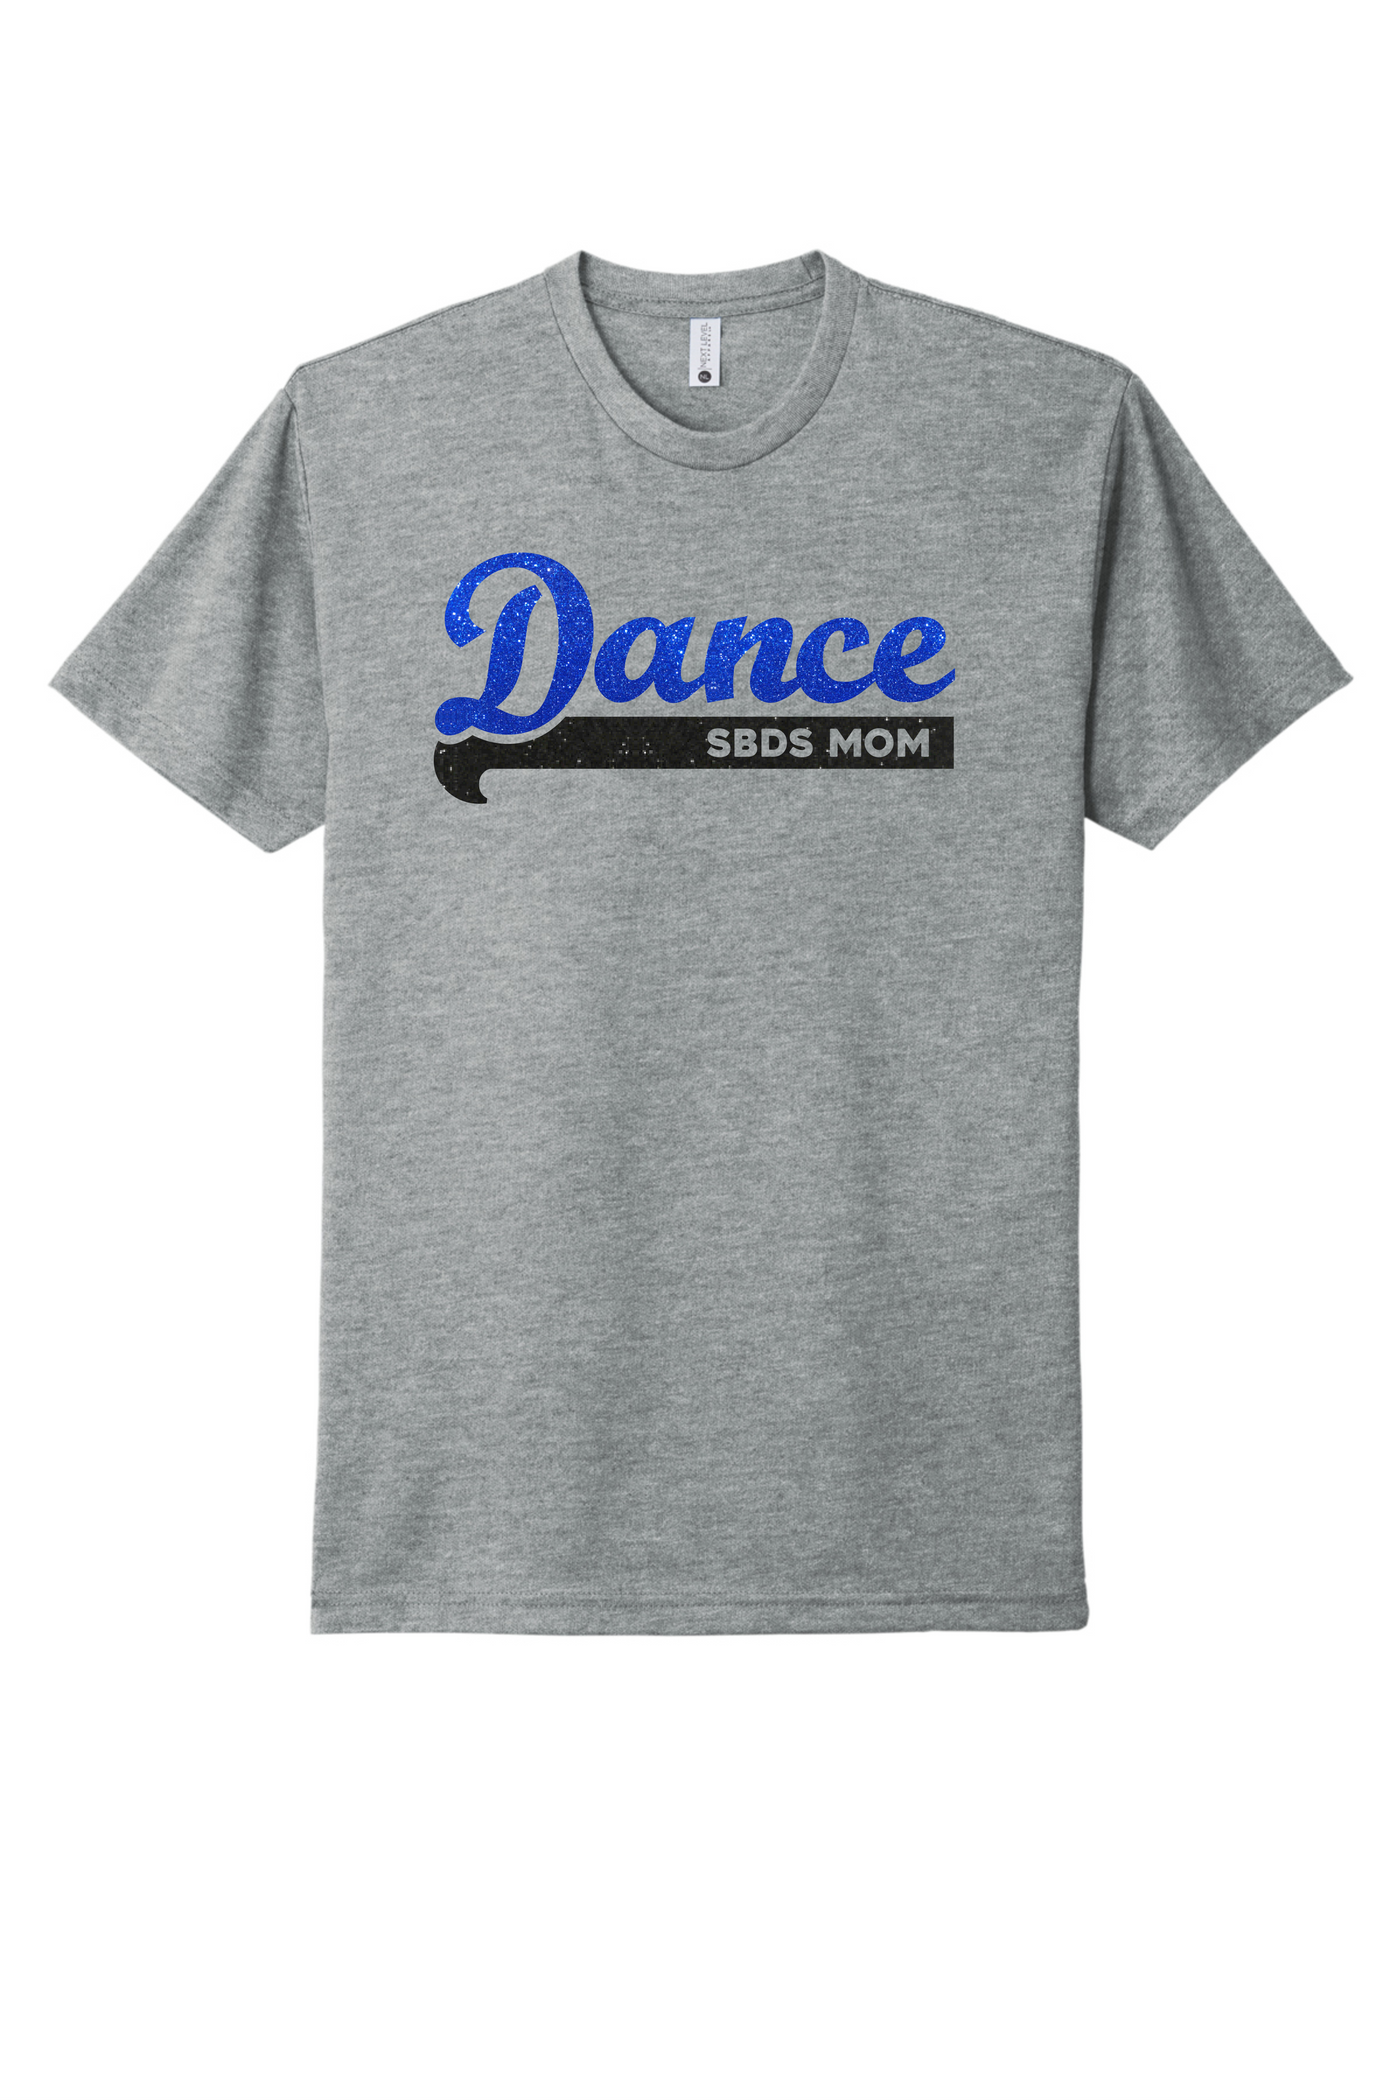 SBDS Dance Mom Short-Sleeve Graphic T-shirt